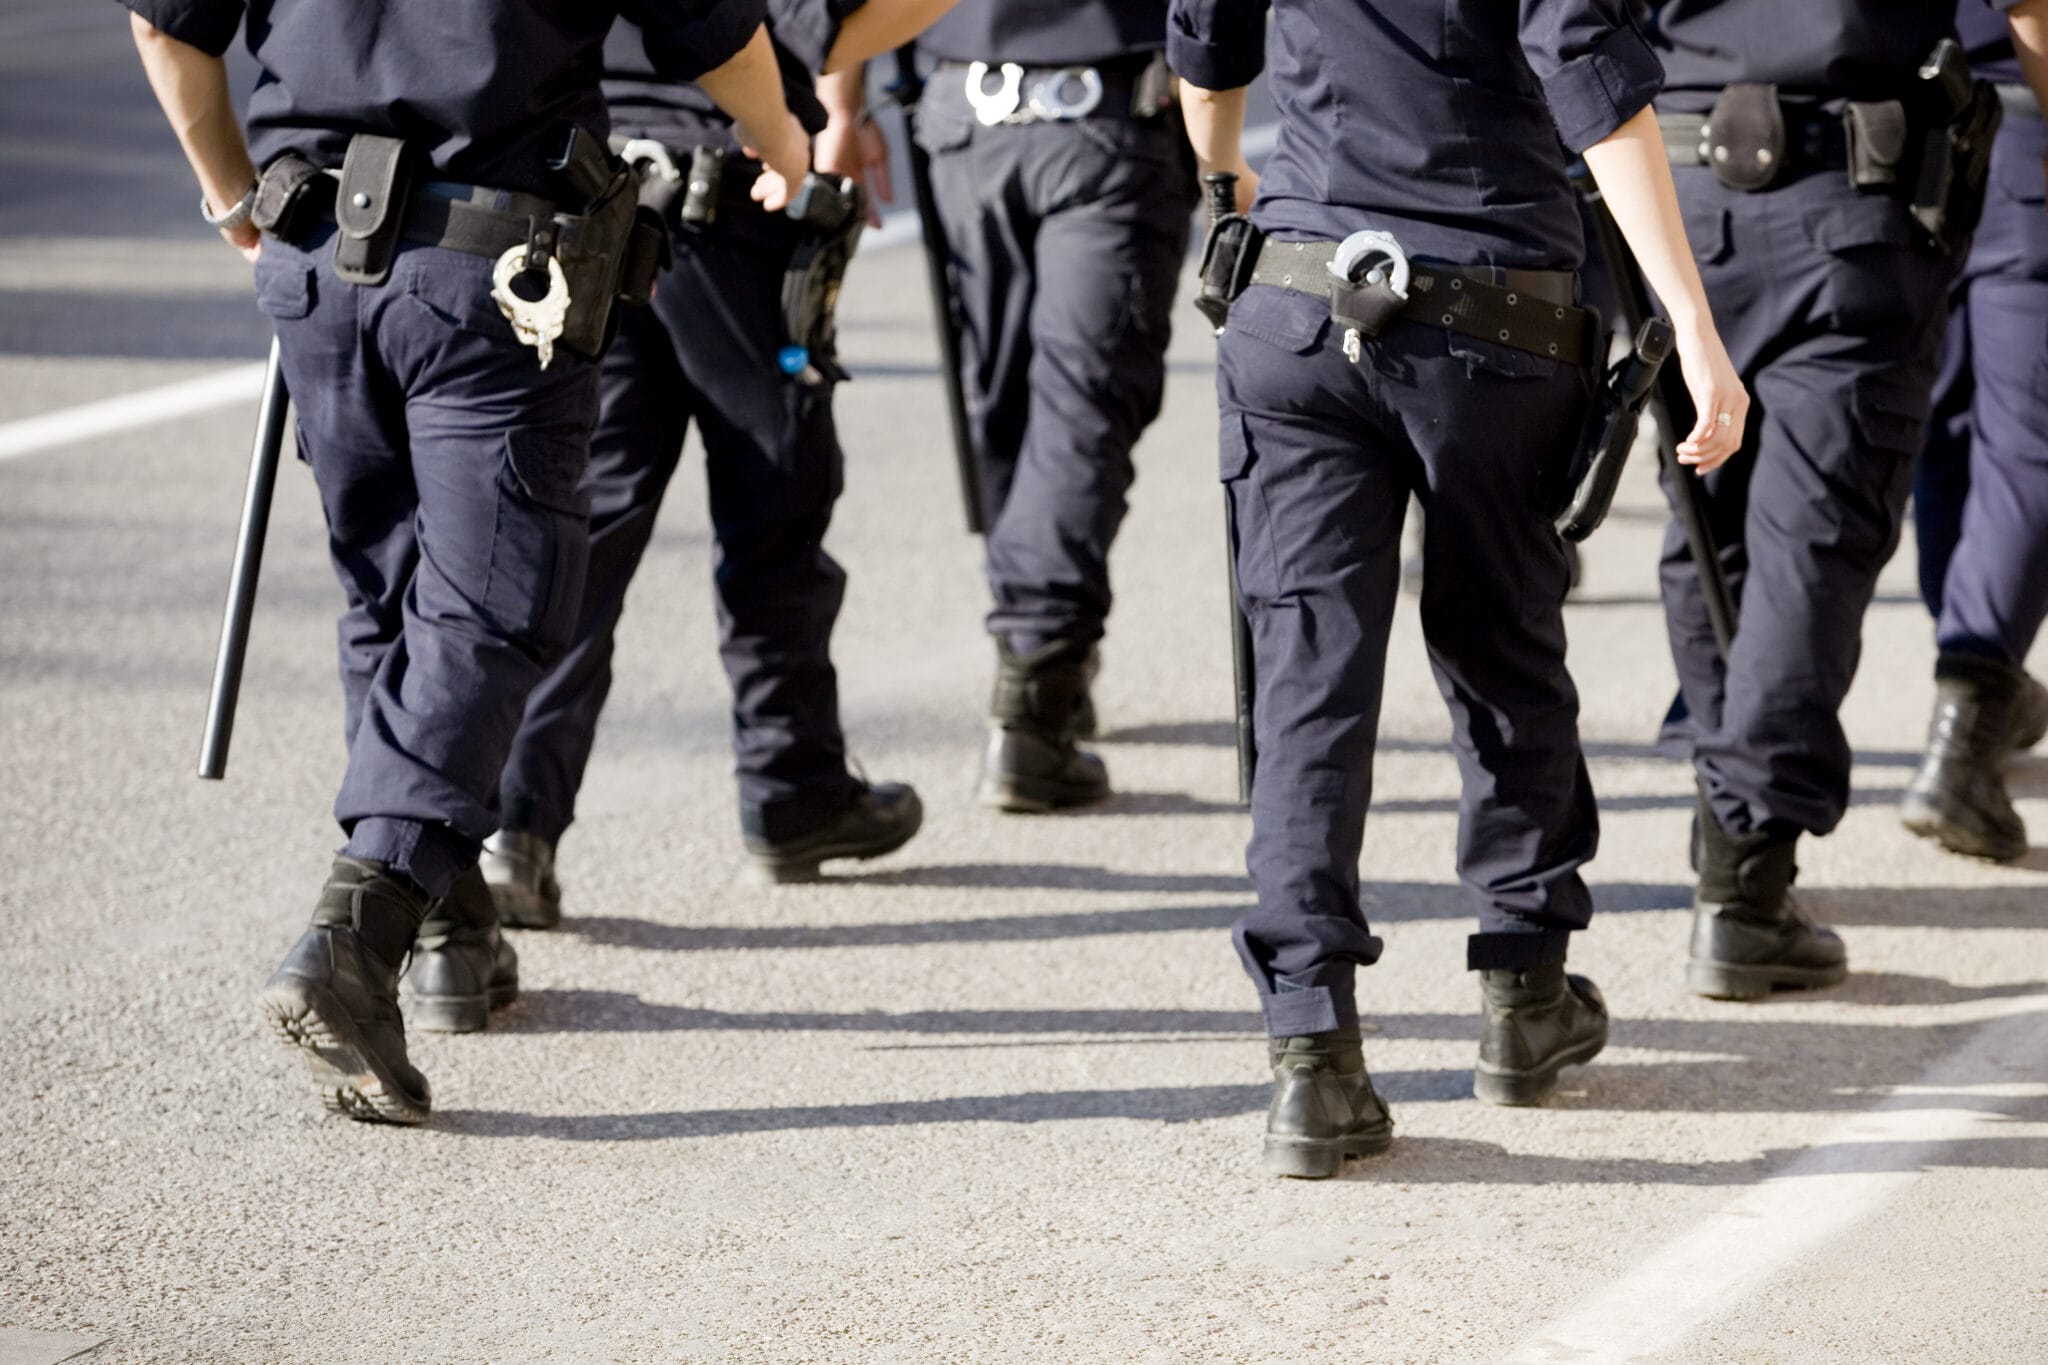 The legs of five police officers in uniform walking | Law enforcement union representation